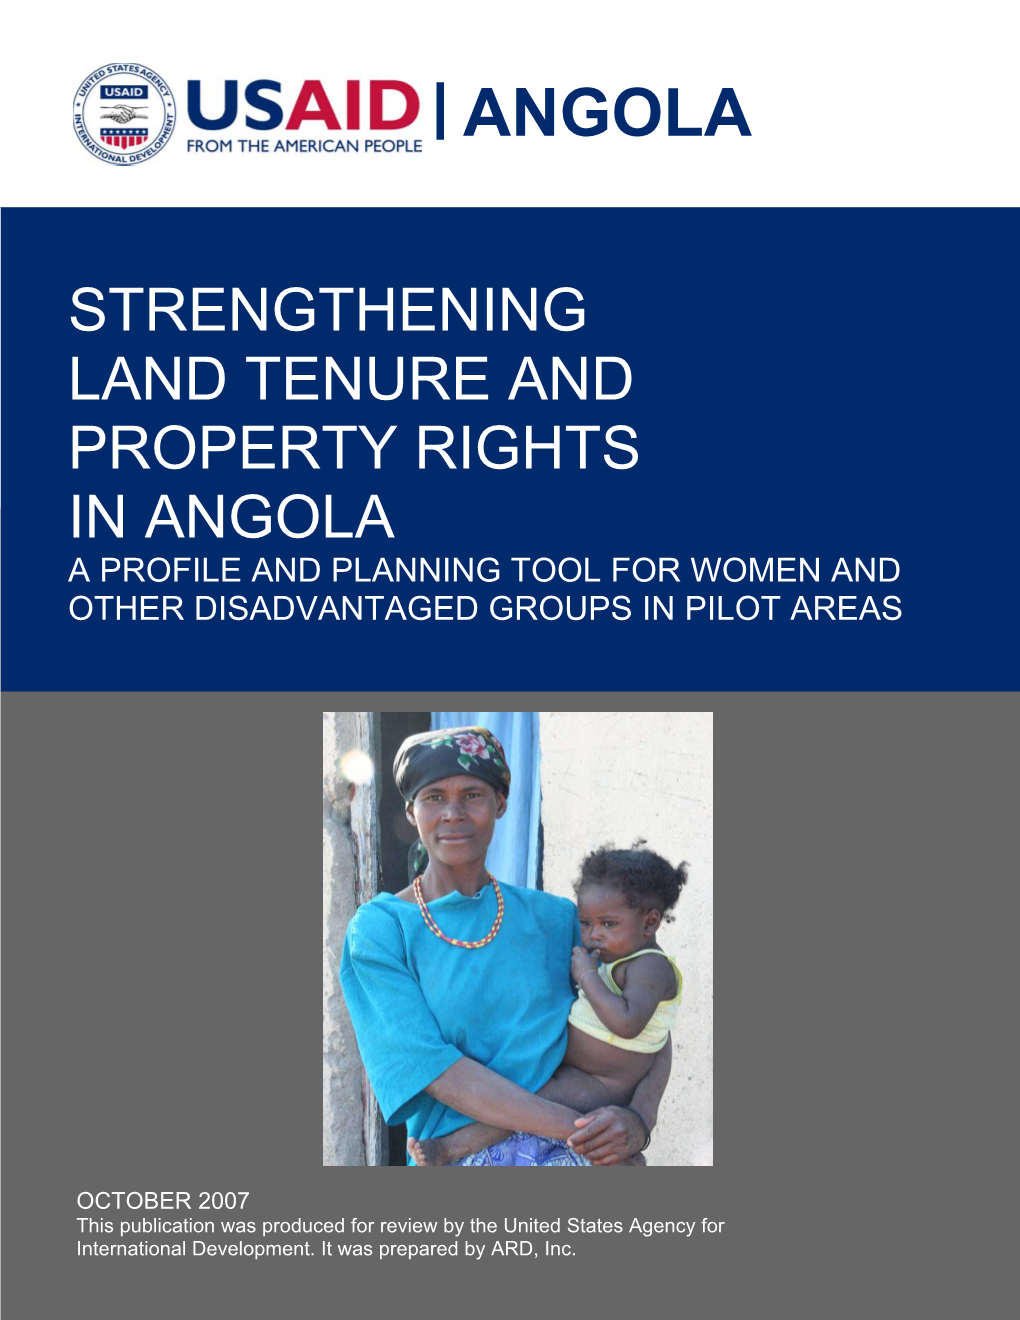 Strengthening Land Tenure and Property Rights in Angola